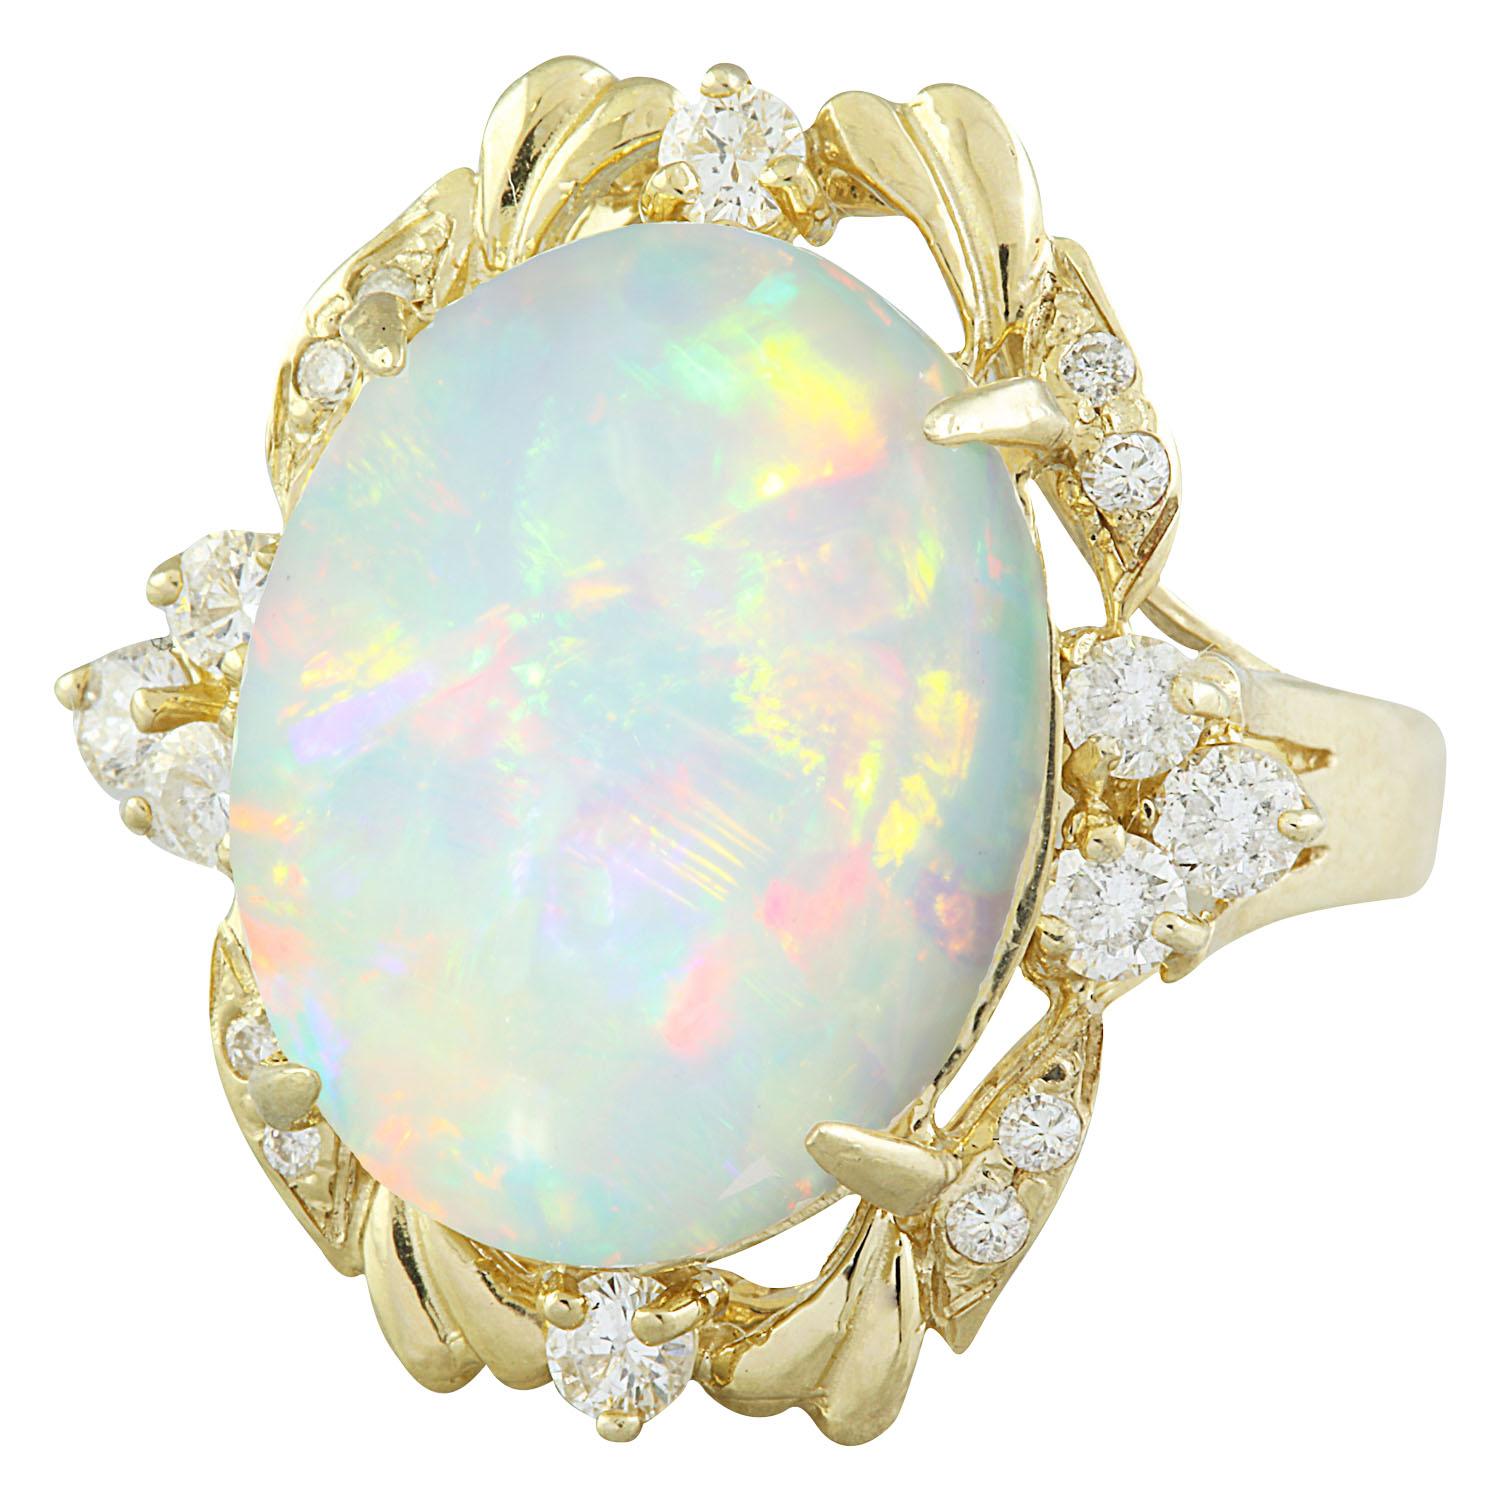 8.87 Carat Natural Opal 14 Karat Solid Yellow Gold Diamond Ring
Stamped: 14K 
Total Ring Weight: 6.7 Grams
Opal Weight 8.27 Carat (16.00x12.00 Millimeters)
Treatment: None
Diamond Weight: 0.60 Carat (F-G Color, VS2-SI1 Clarity )
Treatment: None
Face